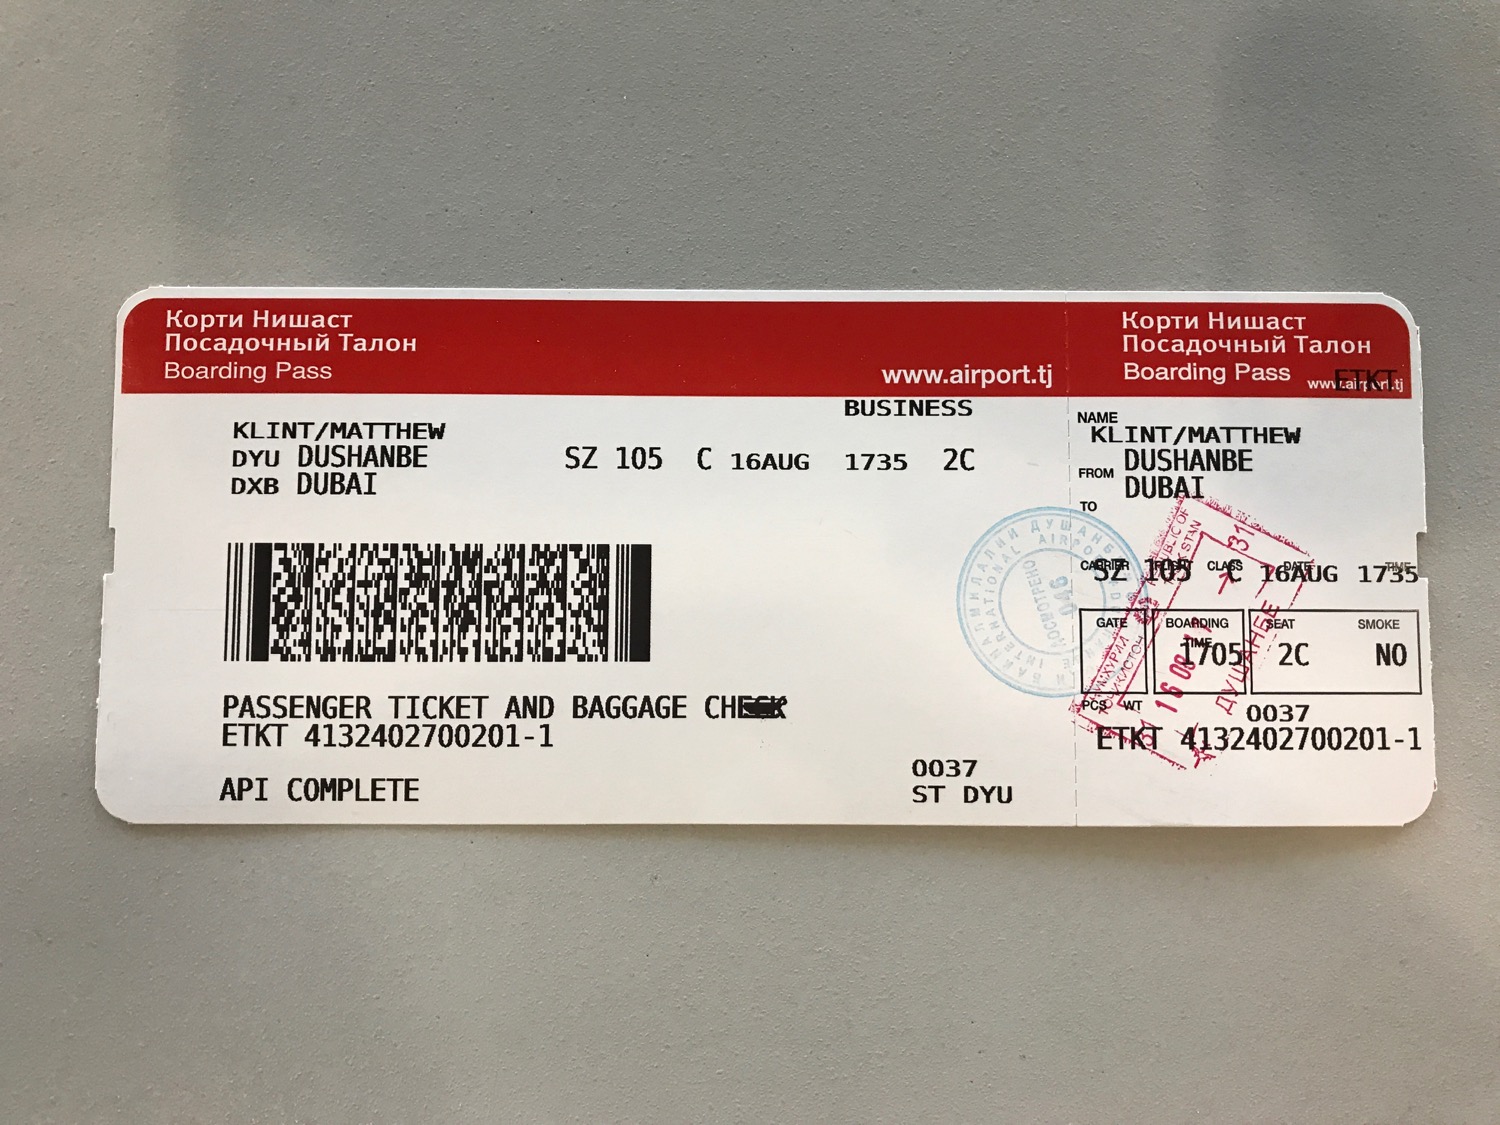 a white and red ticket with black text and a barcode